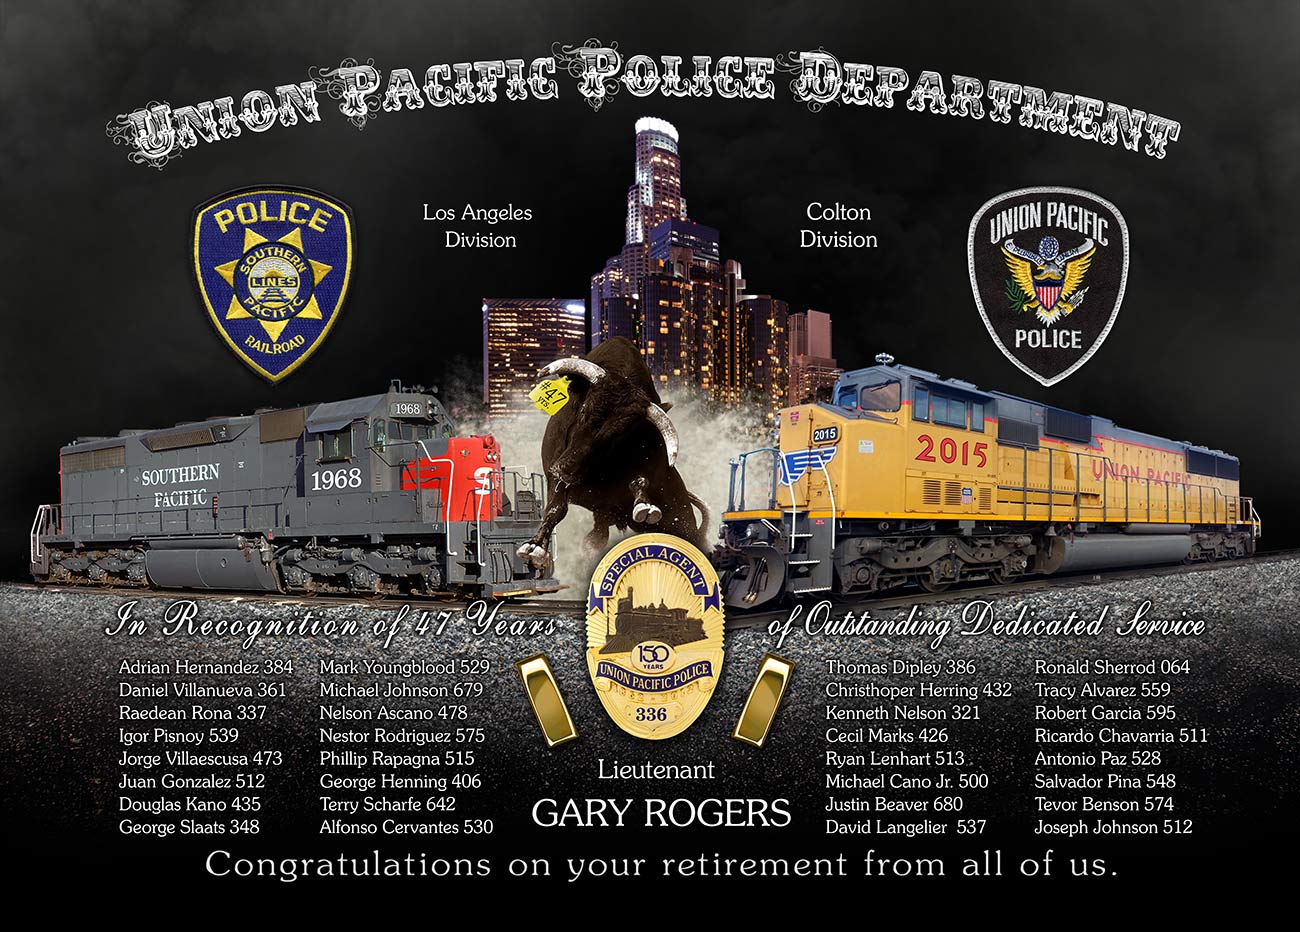 Rogers / Union Pacific Police  Presentation from Badge Frame